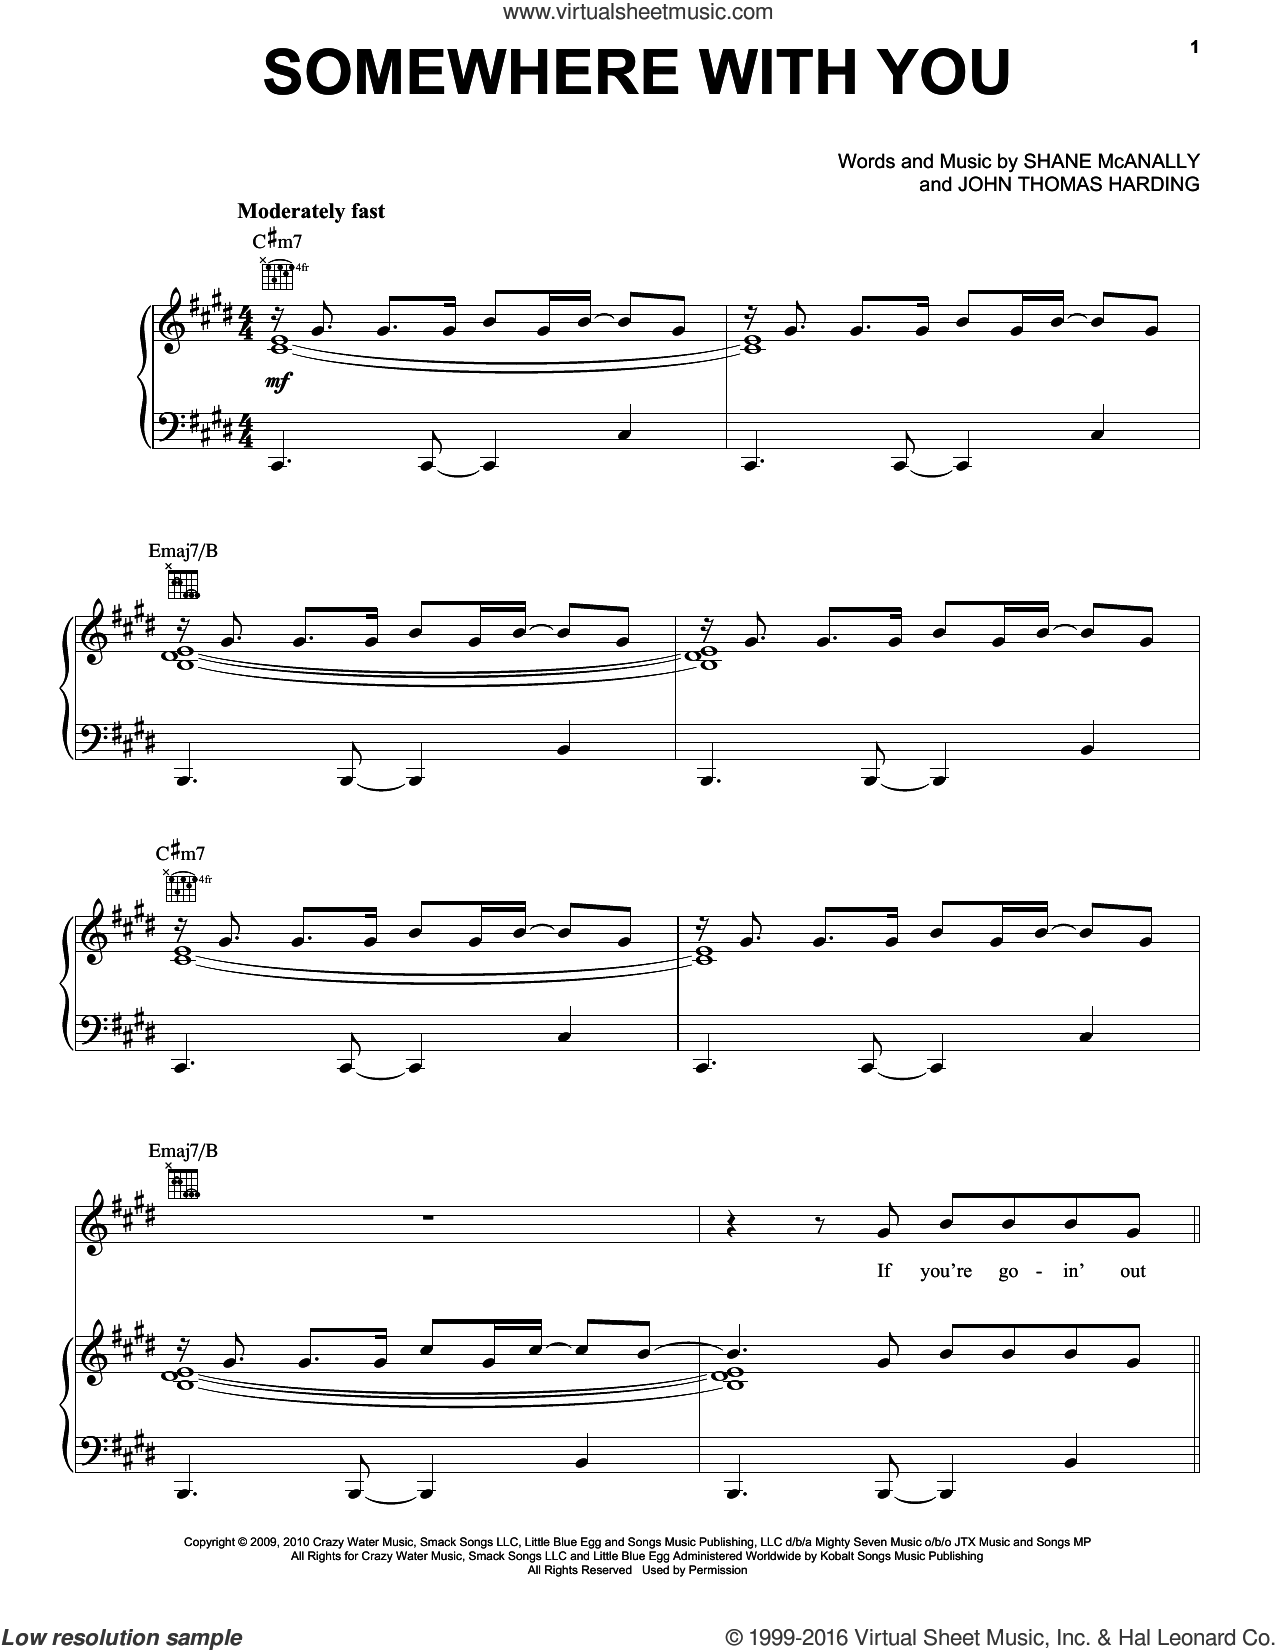 Somewhere With You sheet music for voice, piano or guitar (PDF)